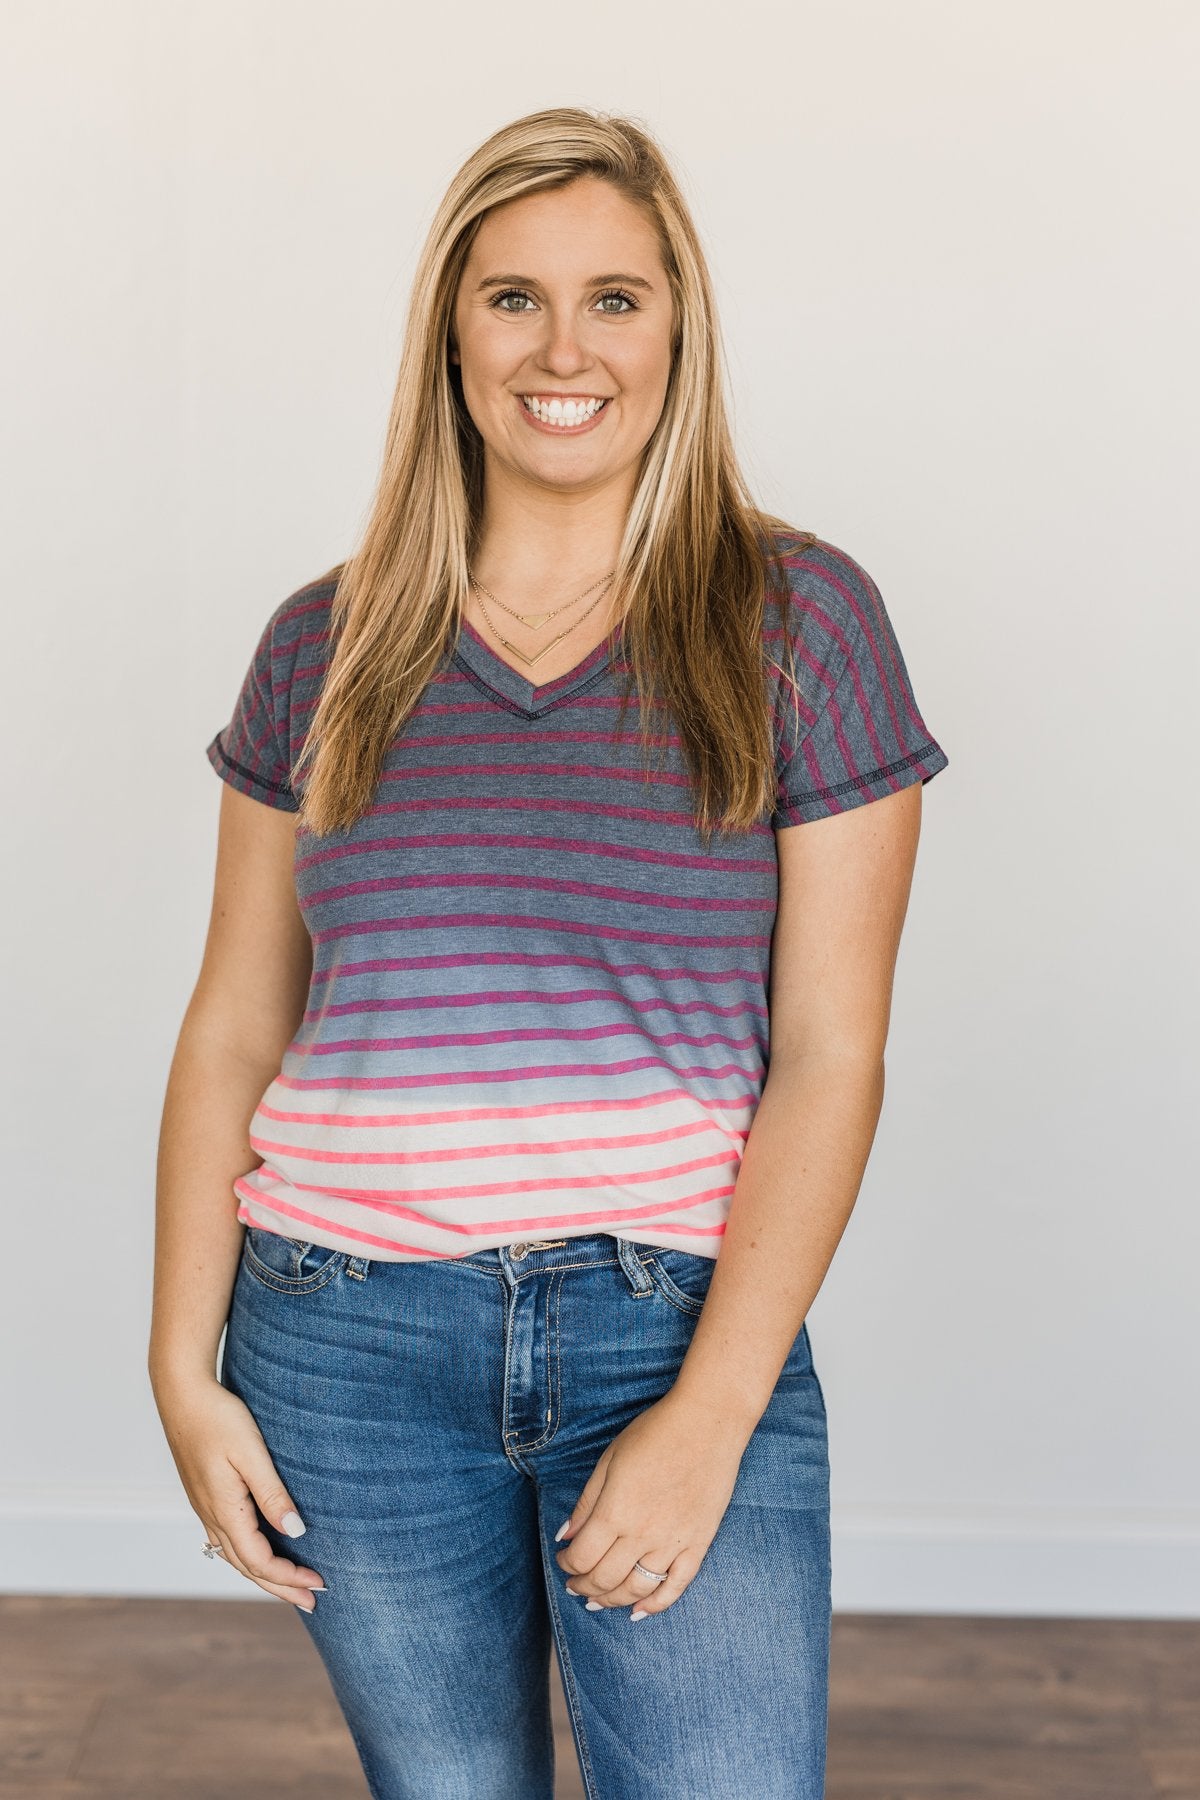 Spectacular Sights Striped Ombre Top- Charcoal & Pink – The Pulse Boutique